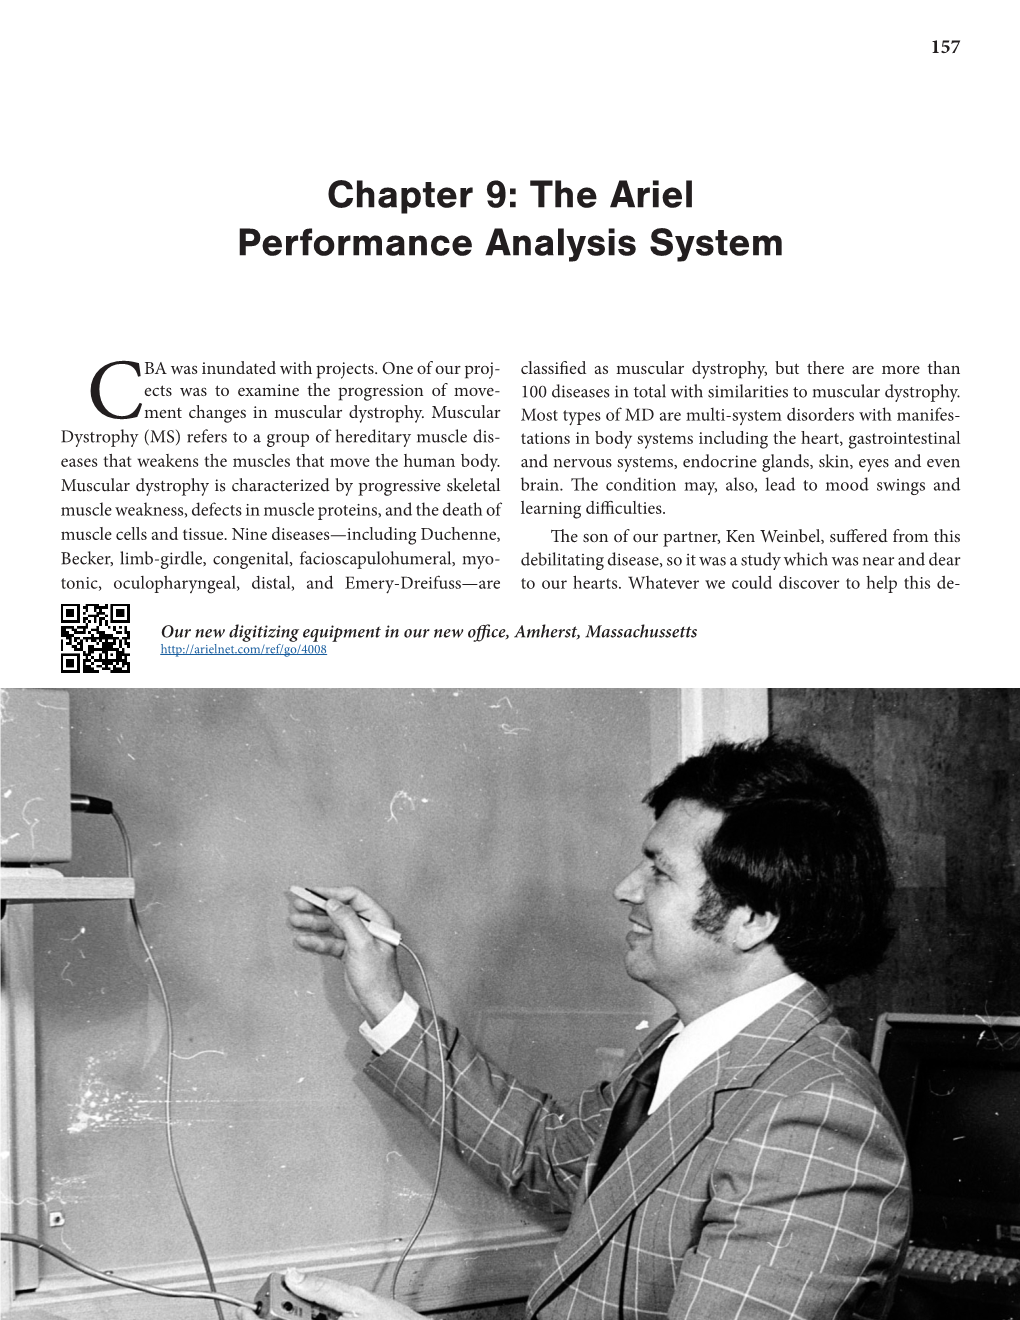 The Ariel Performance Analysis System